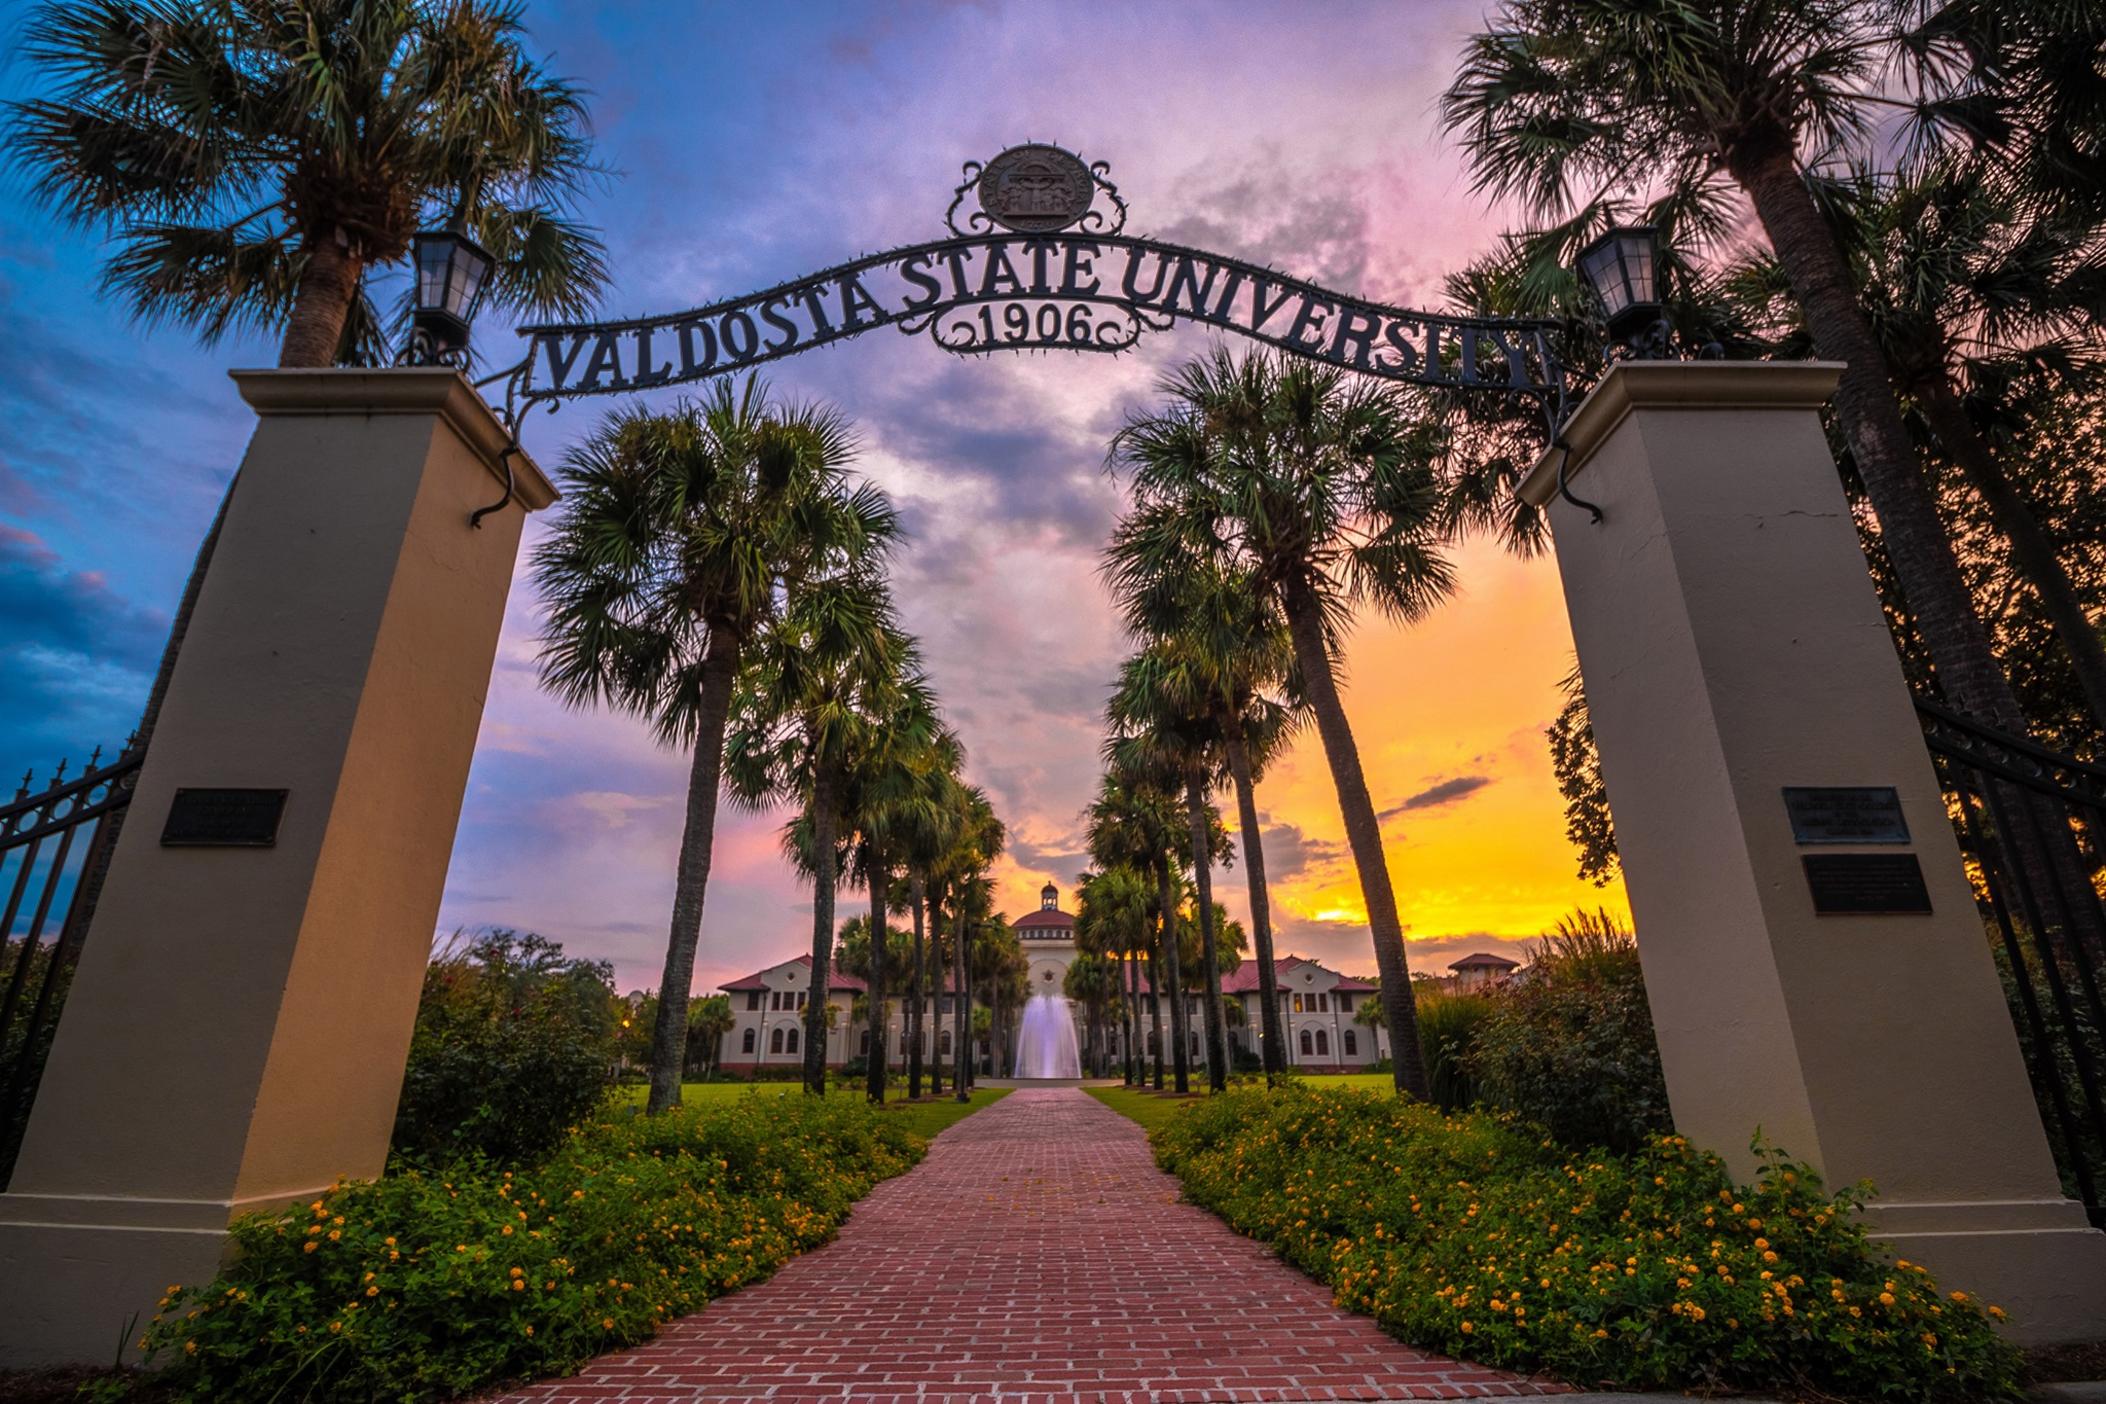 Valdosta State University leads a list of University System of Georgia institutions that are waiving the usual test score requirement for fall 2022 admissions.